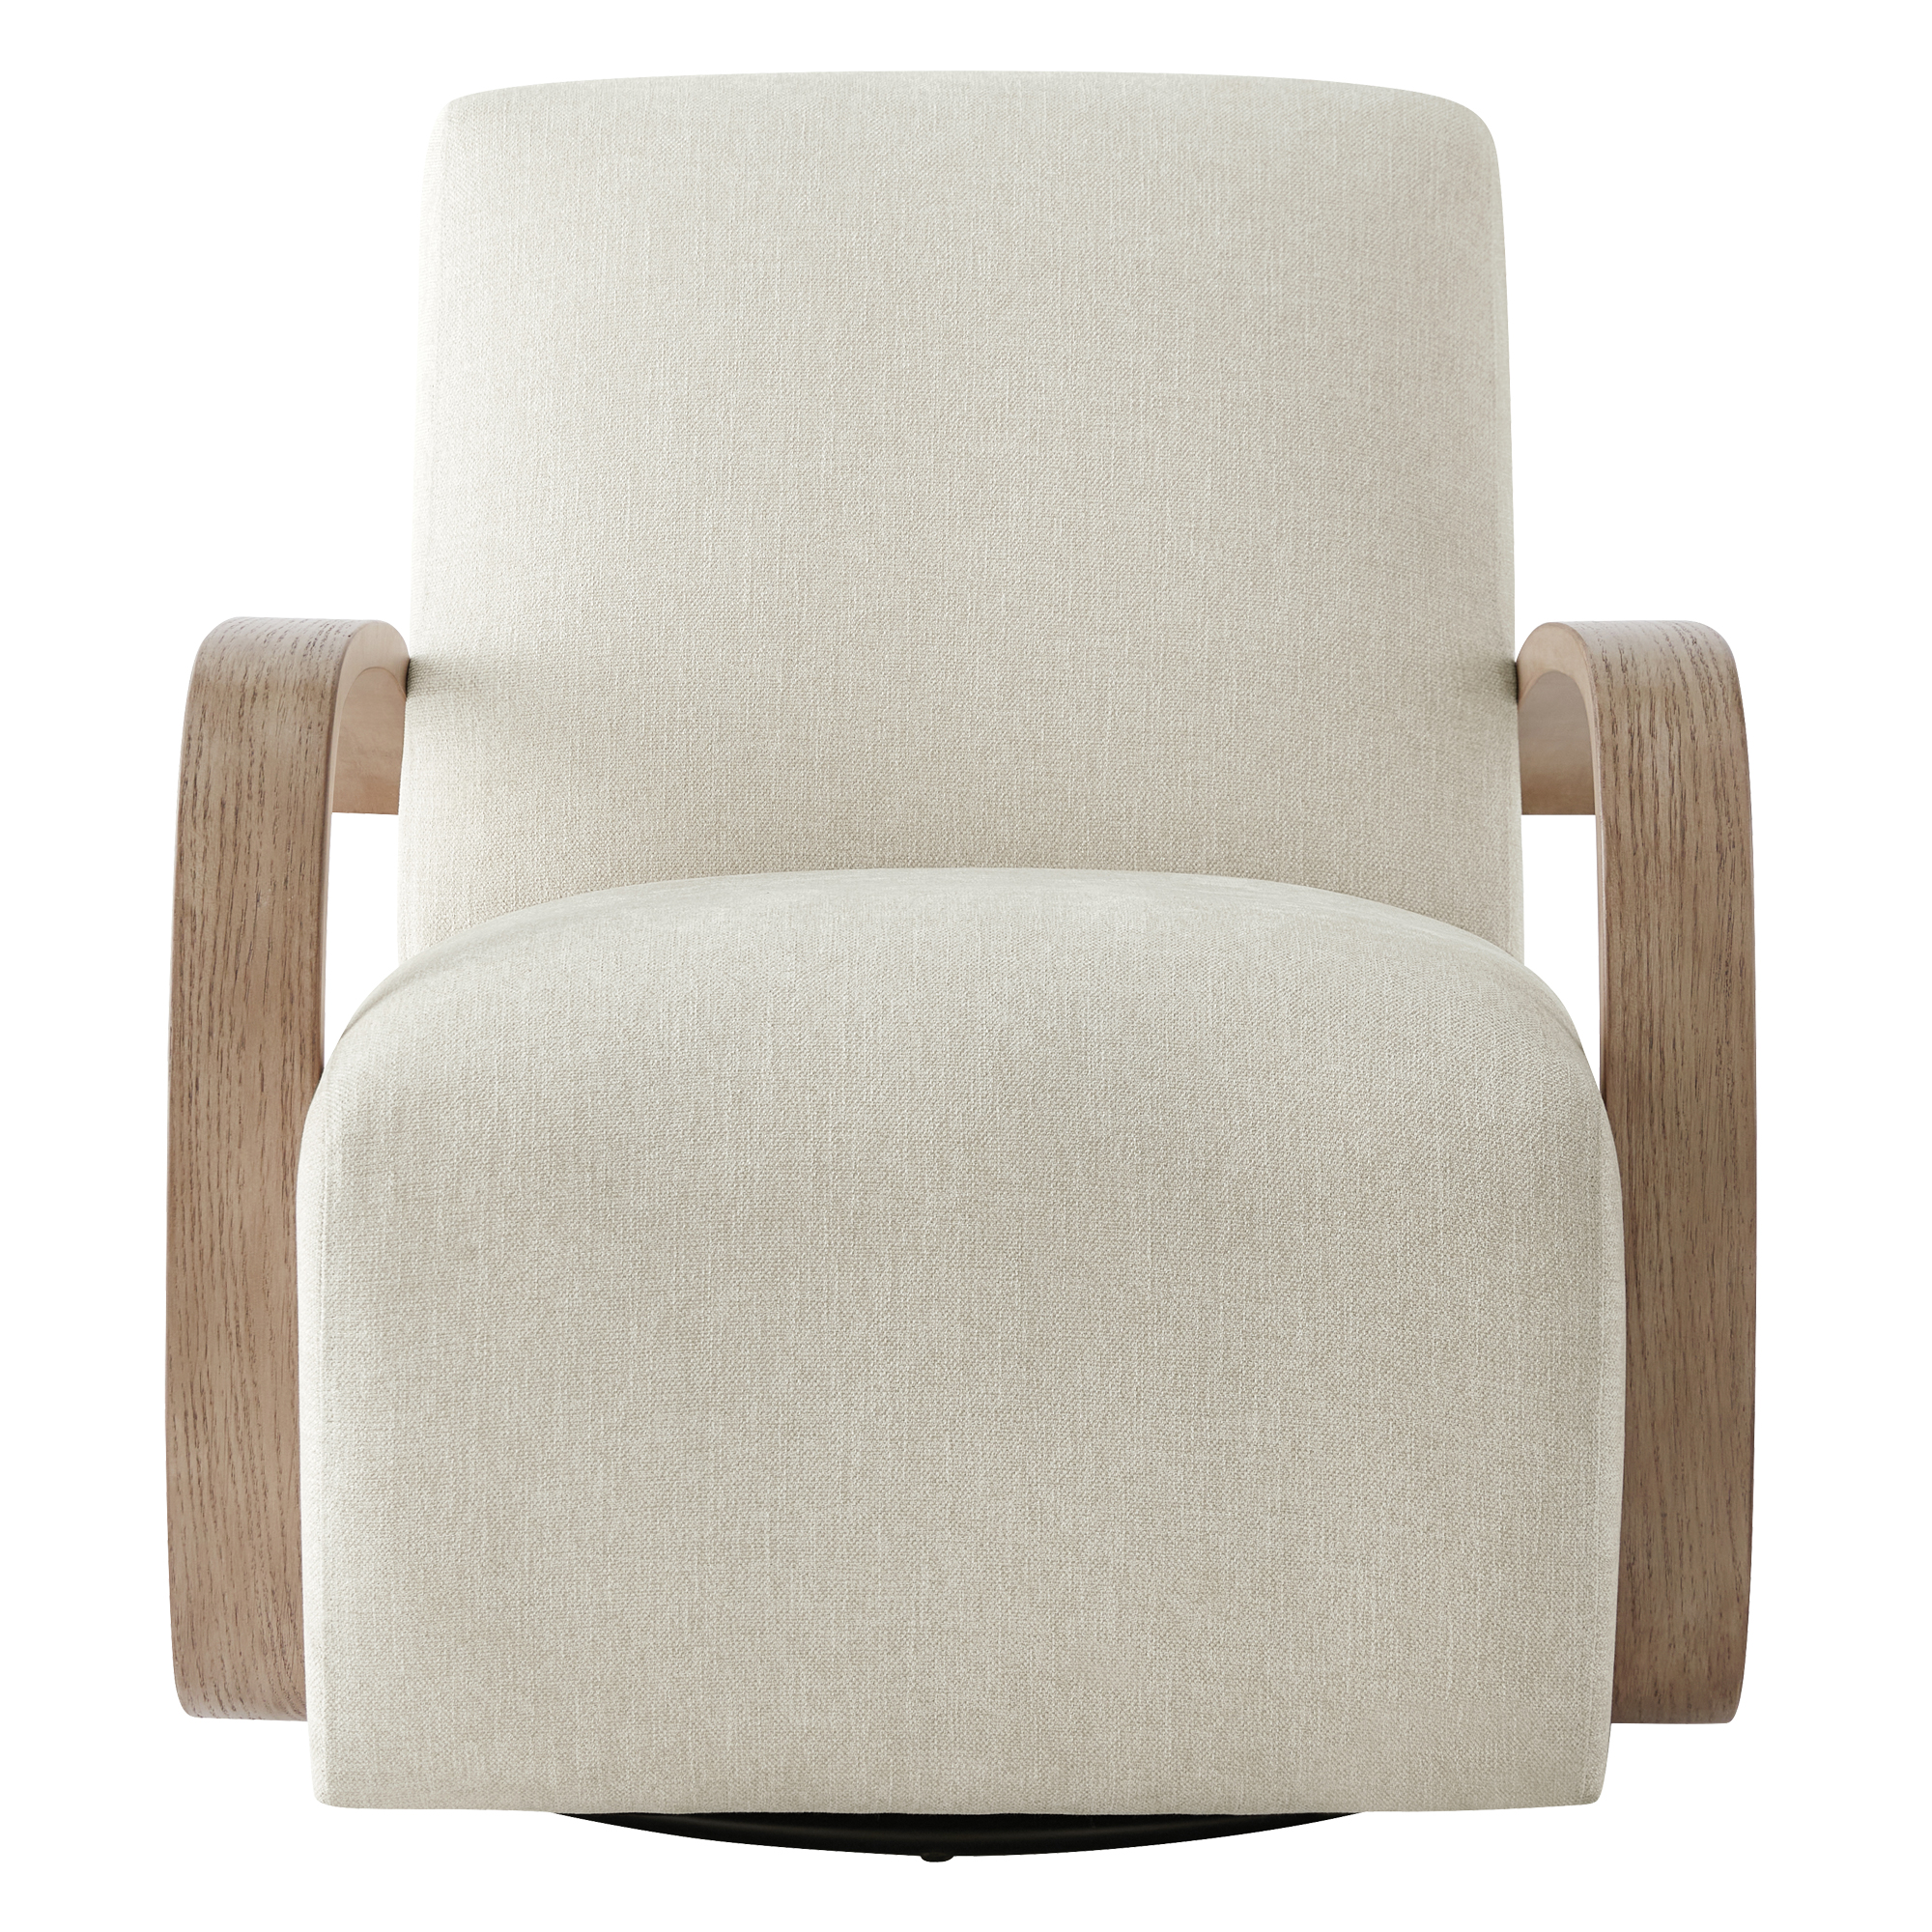 CHITA Swivel Accent Chair with U-shaped Wood Arm for Living Room Beedroom, Linen & Gray Wood - image 5 of 9